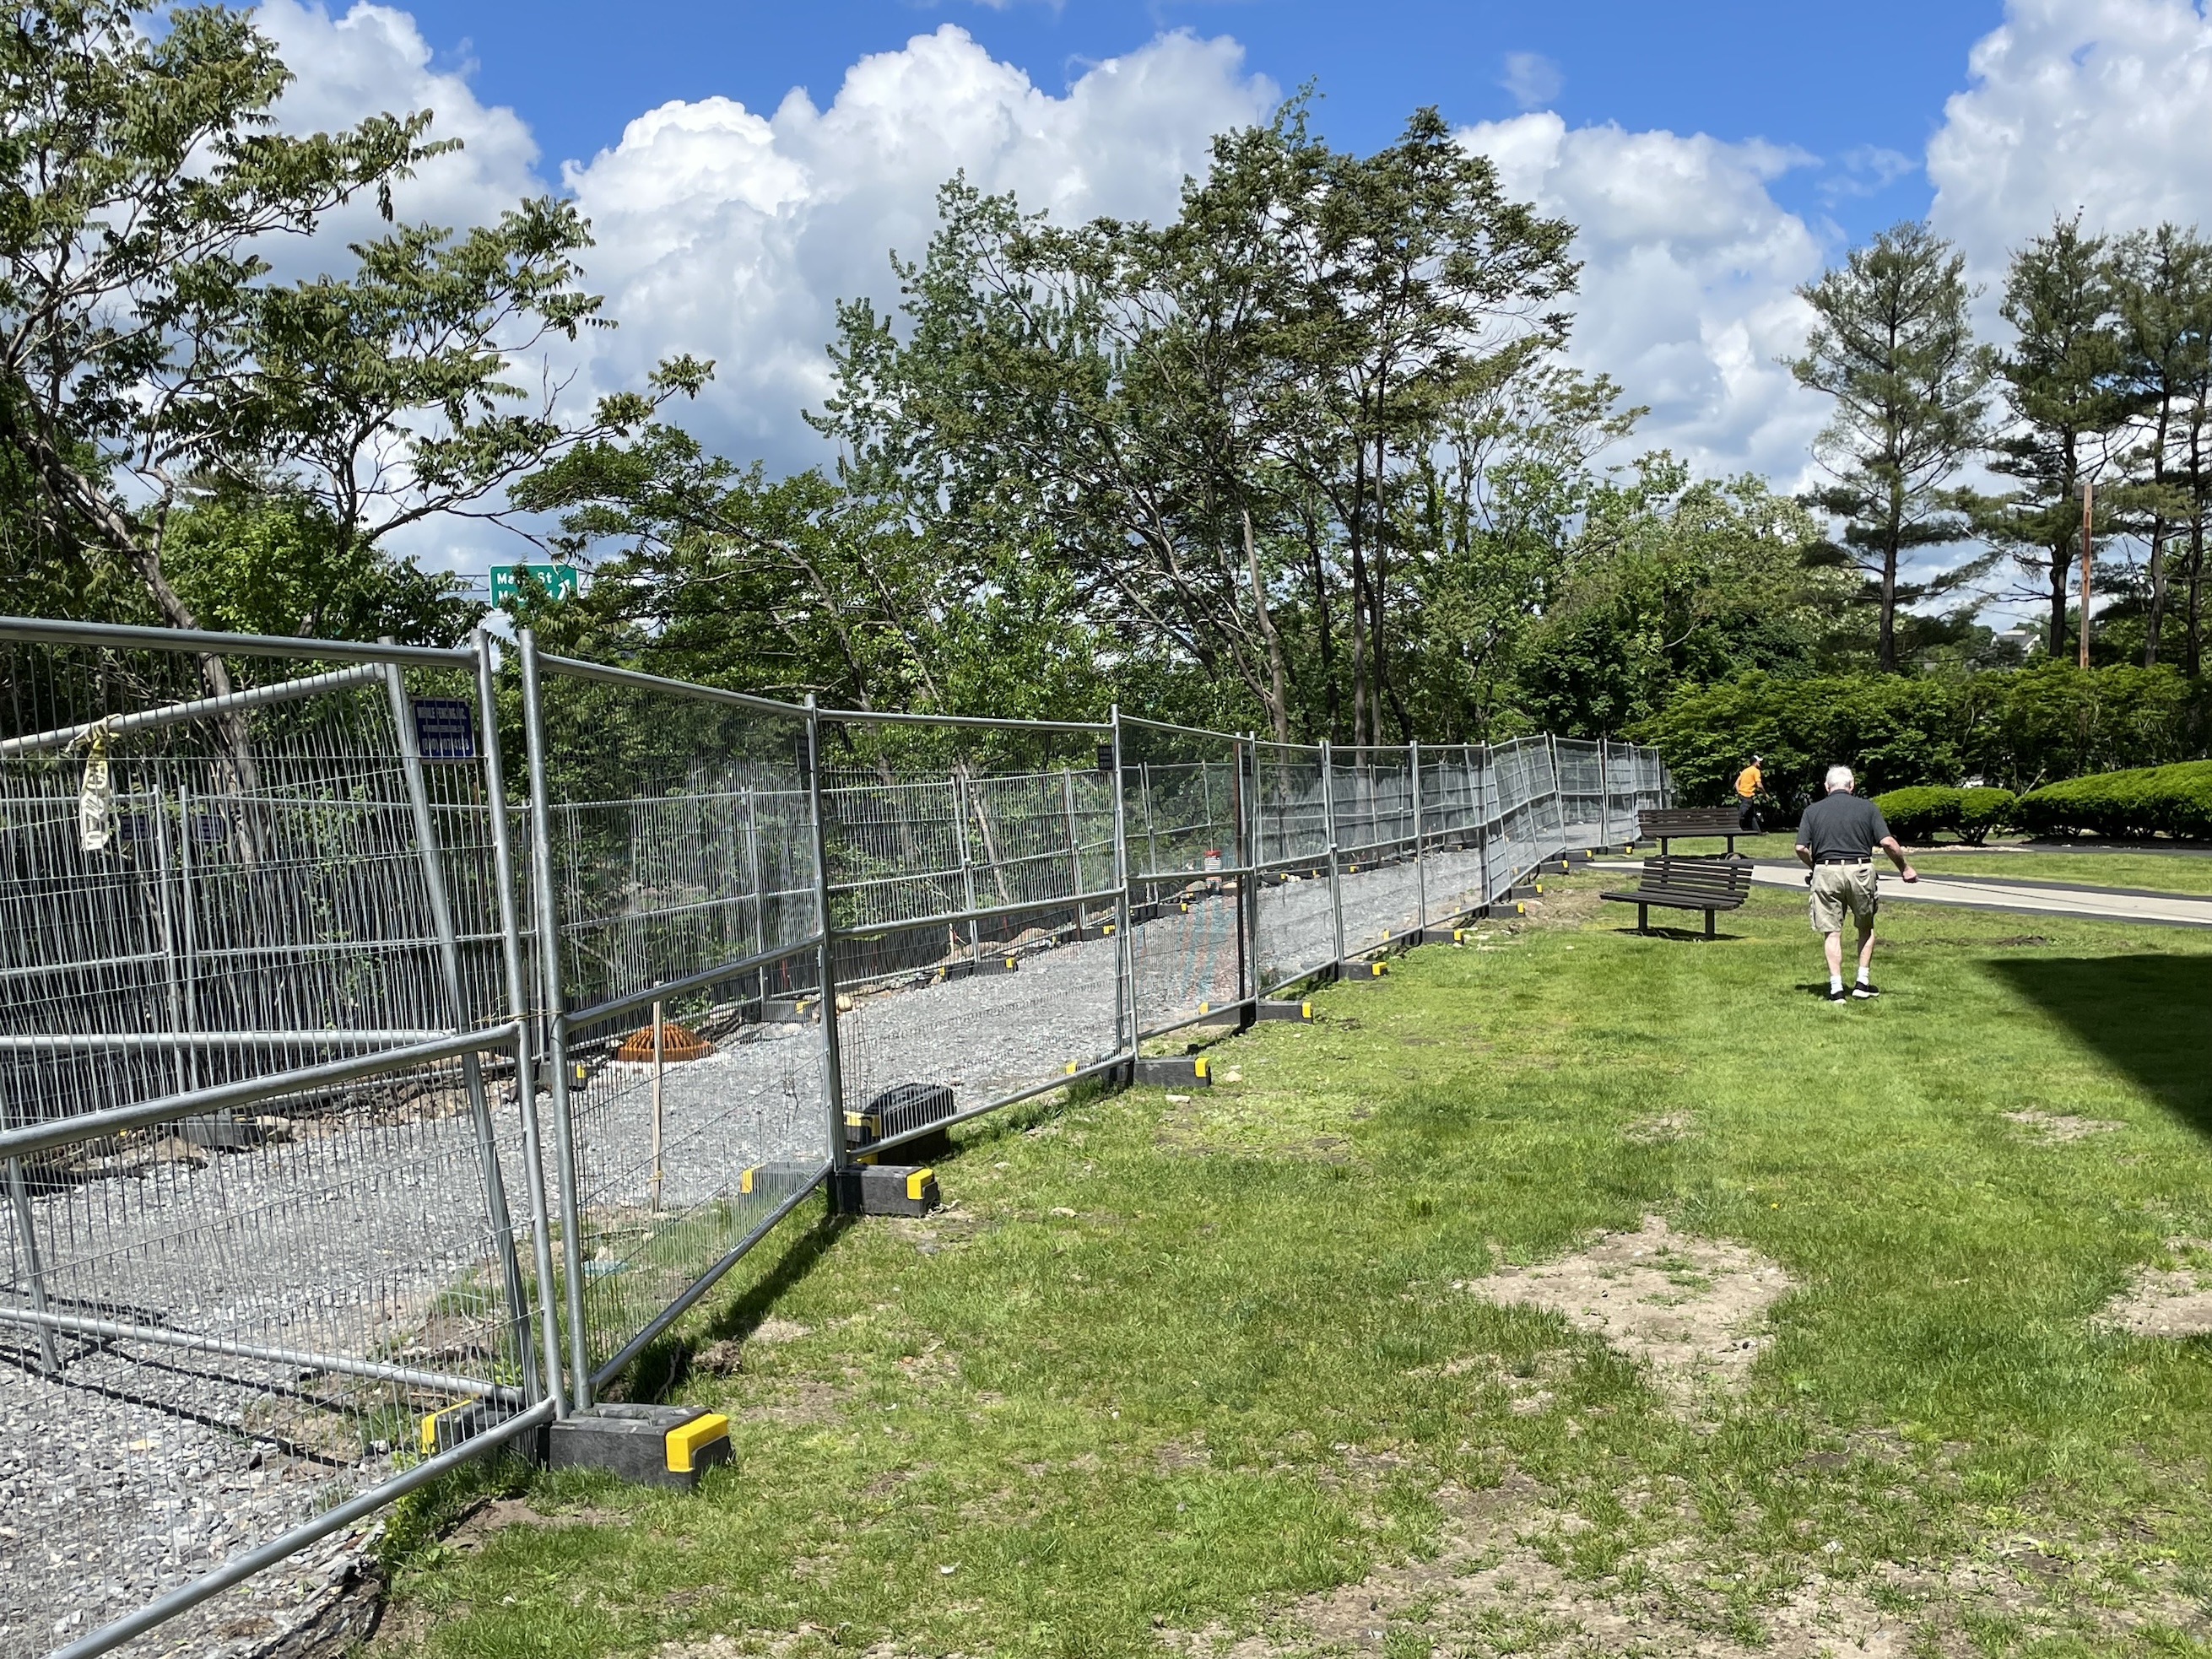 A gravel path under construction behind a metal fence next to a grassy lawn